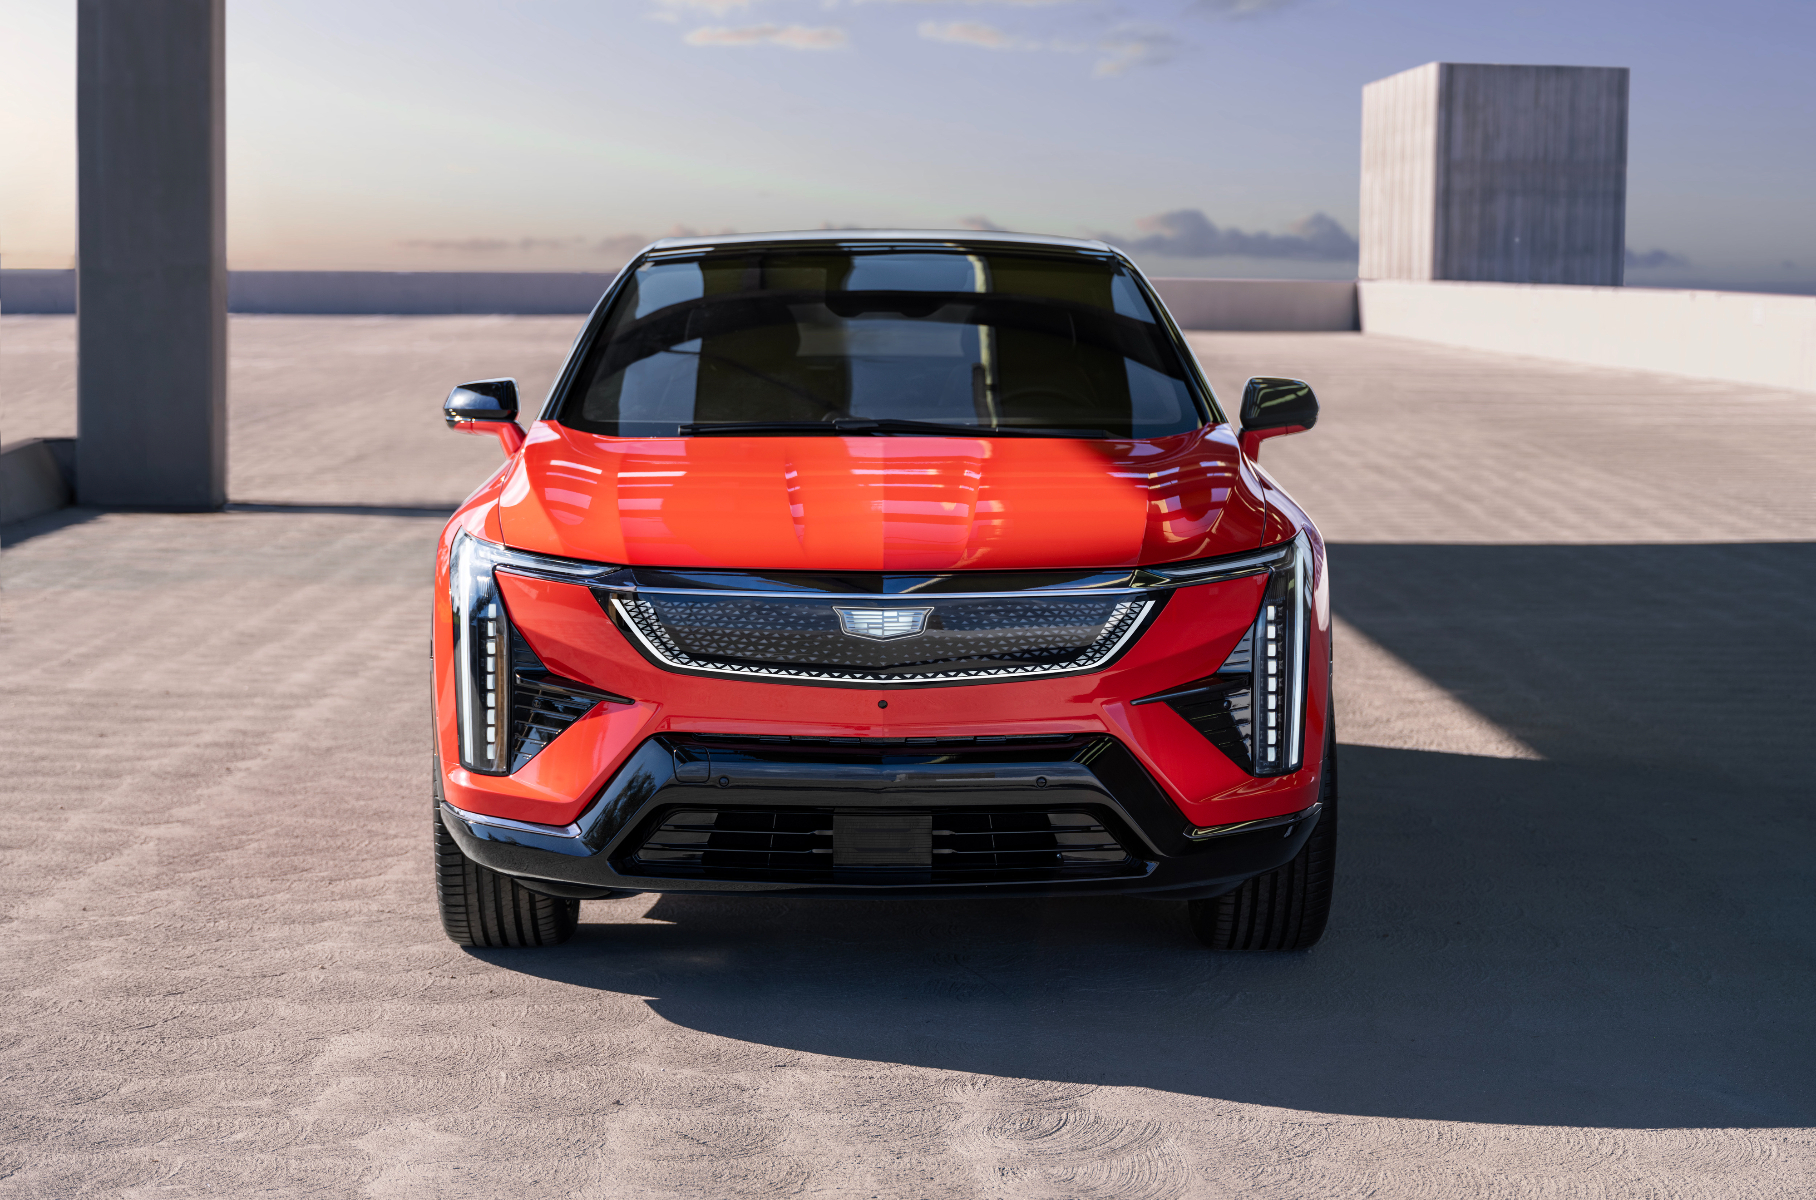 Cadillac showed Americans the affordable electric crossover Optiq